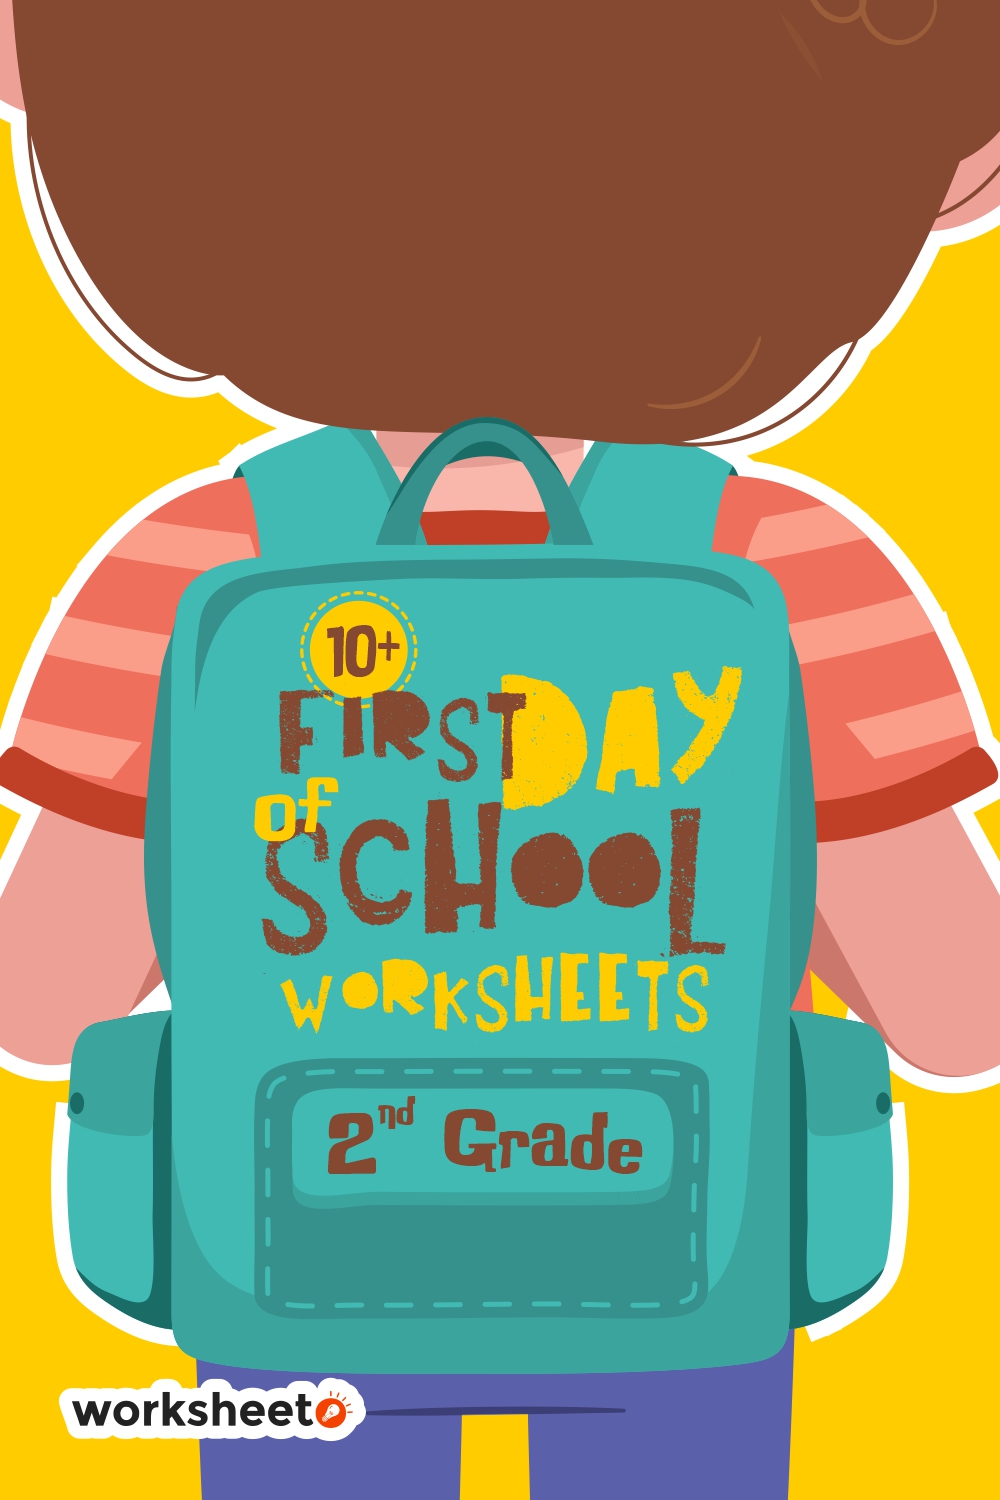 15 First Day Of School Worksheets 2nd Grade Worksheeto